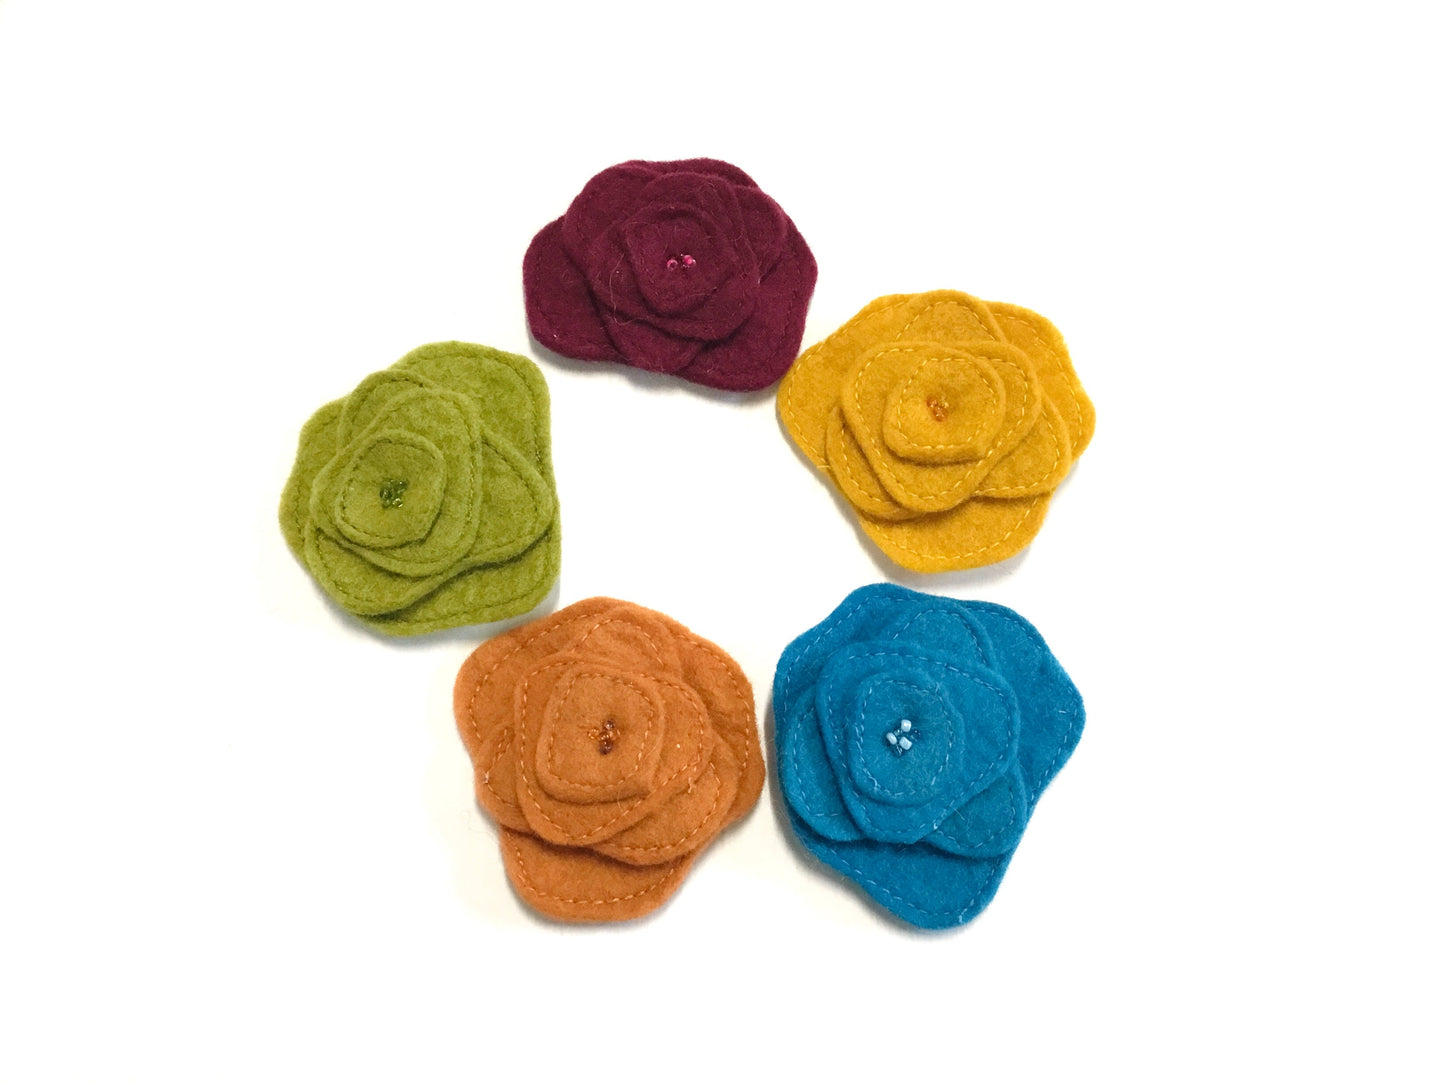 Decorative Wool Flower Pins - Fibres of Life